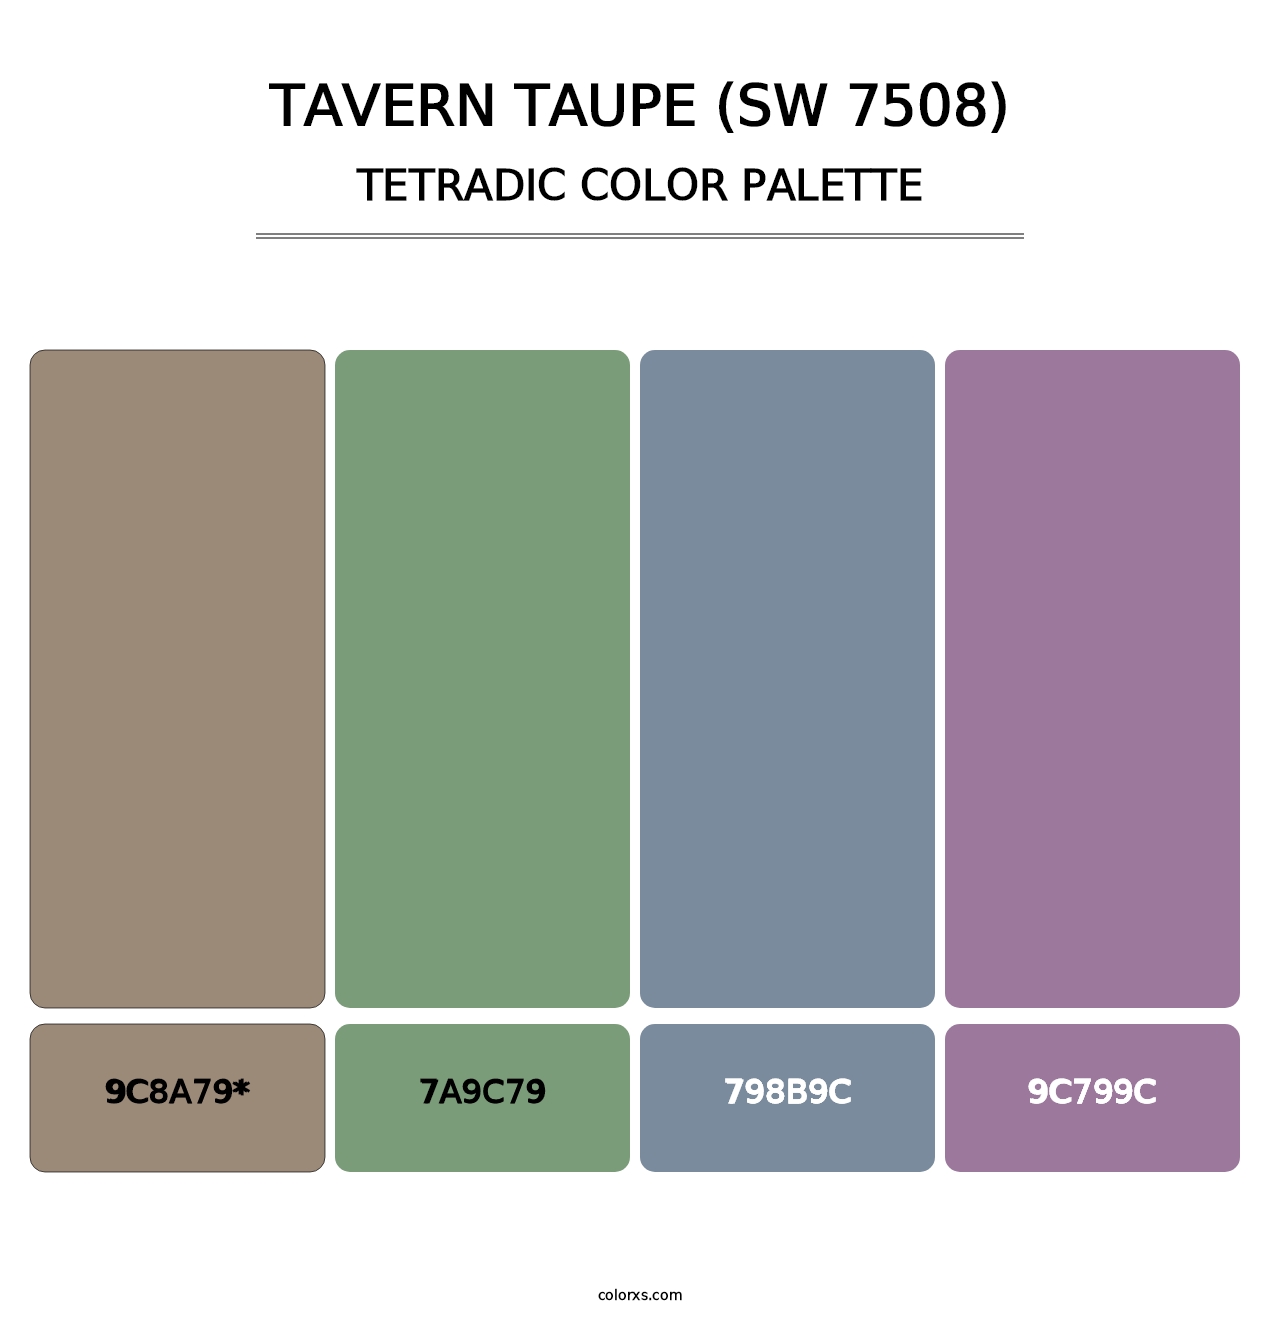 Tavern Taupe (SW 7508) - Tetradic Color Palette